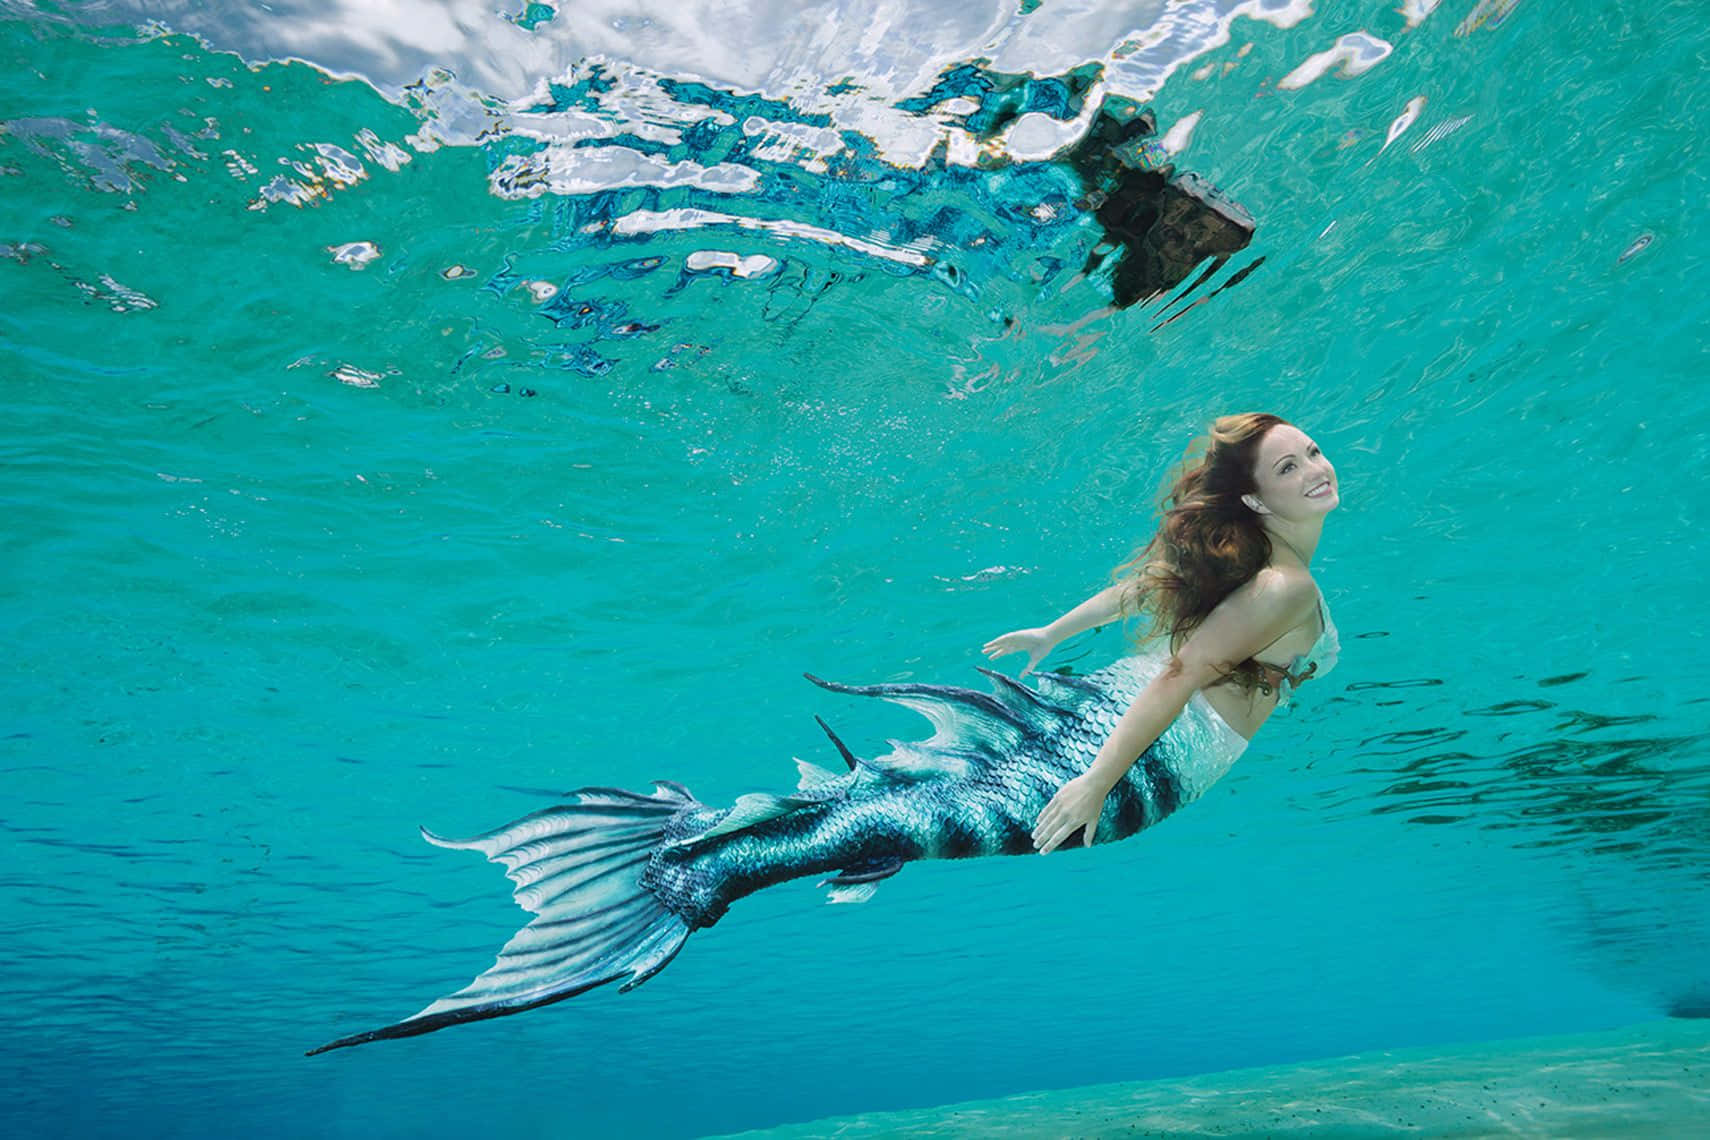 "Live underwater like a mermaid with a lifelong journey full of surprises and freedom."